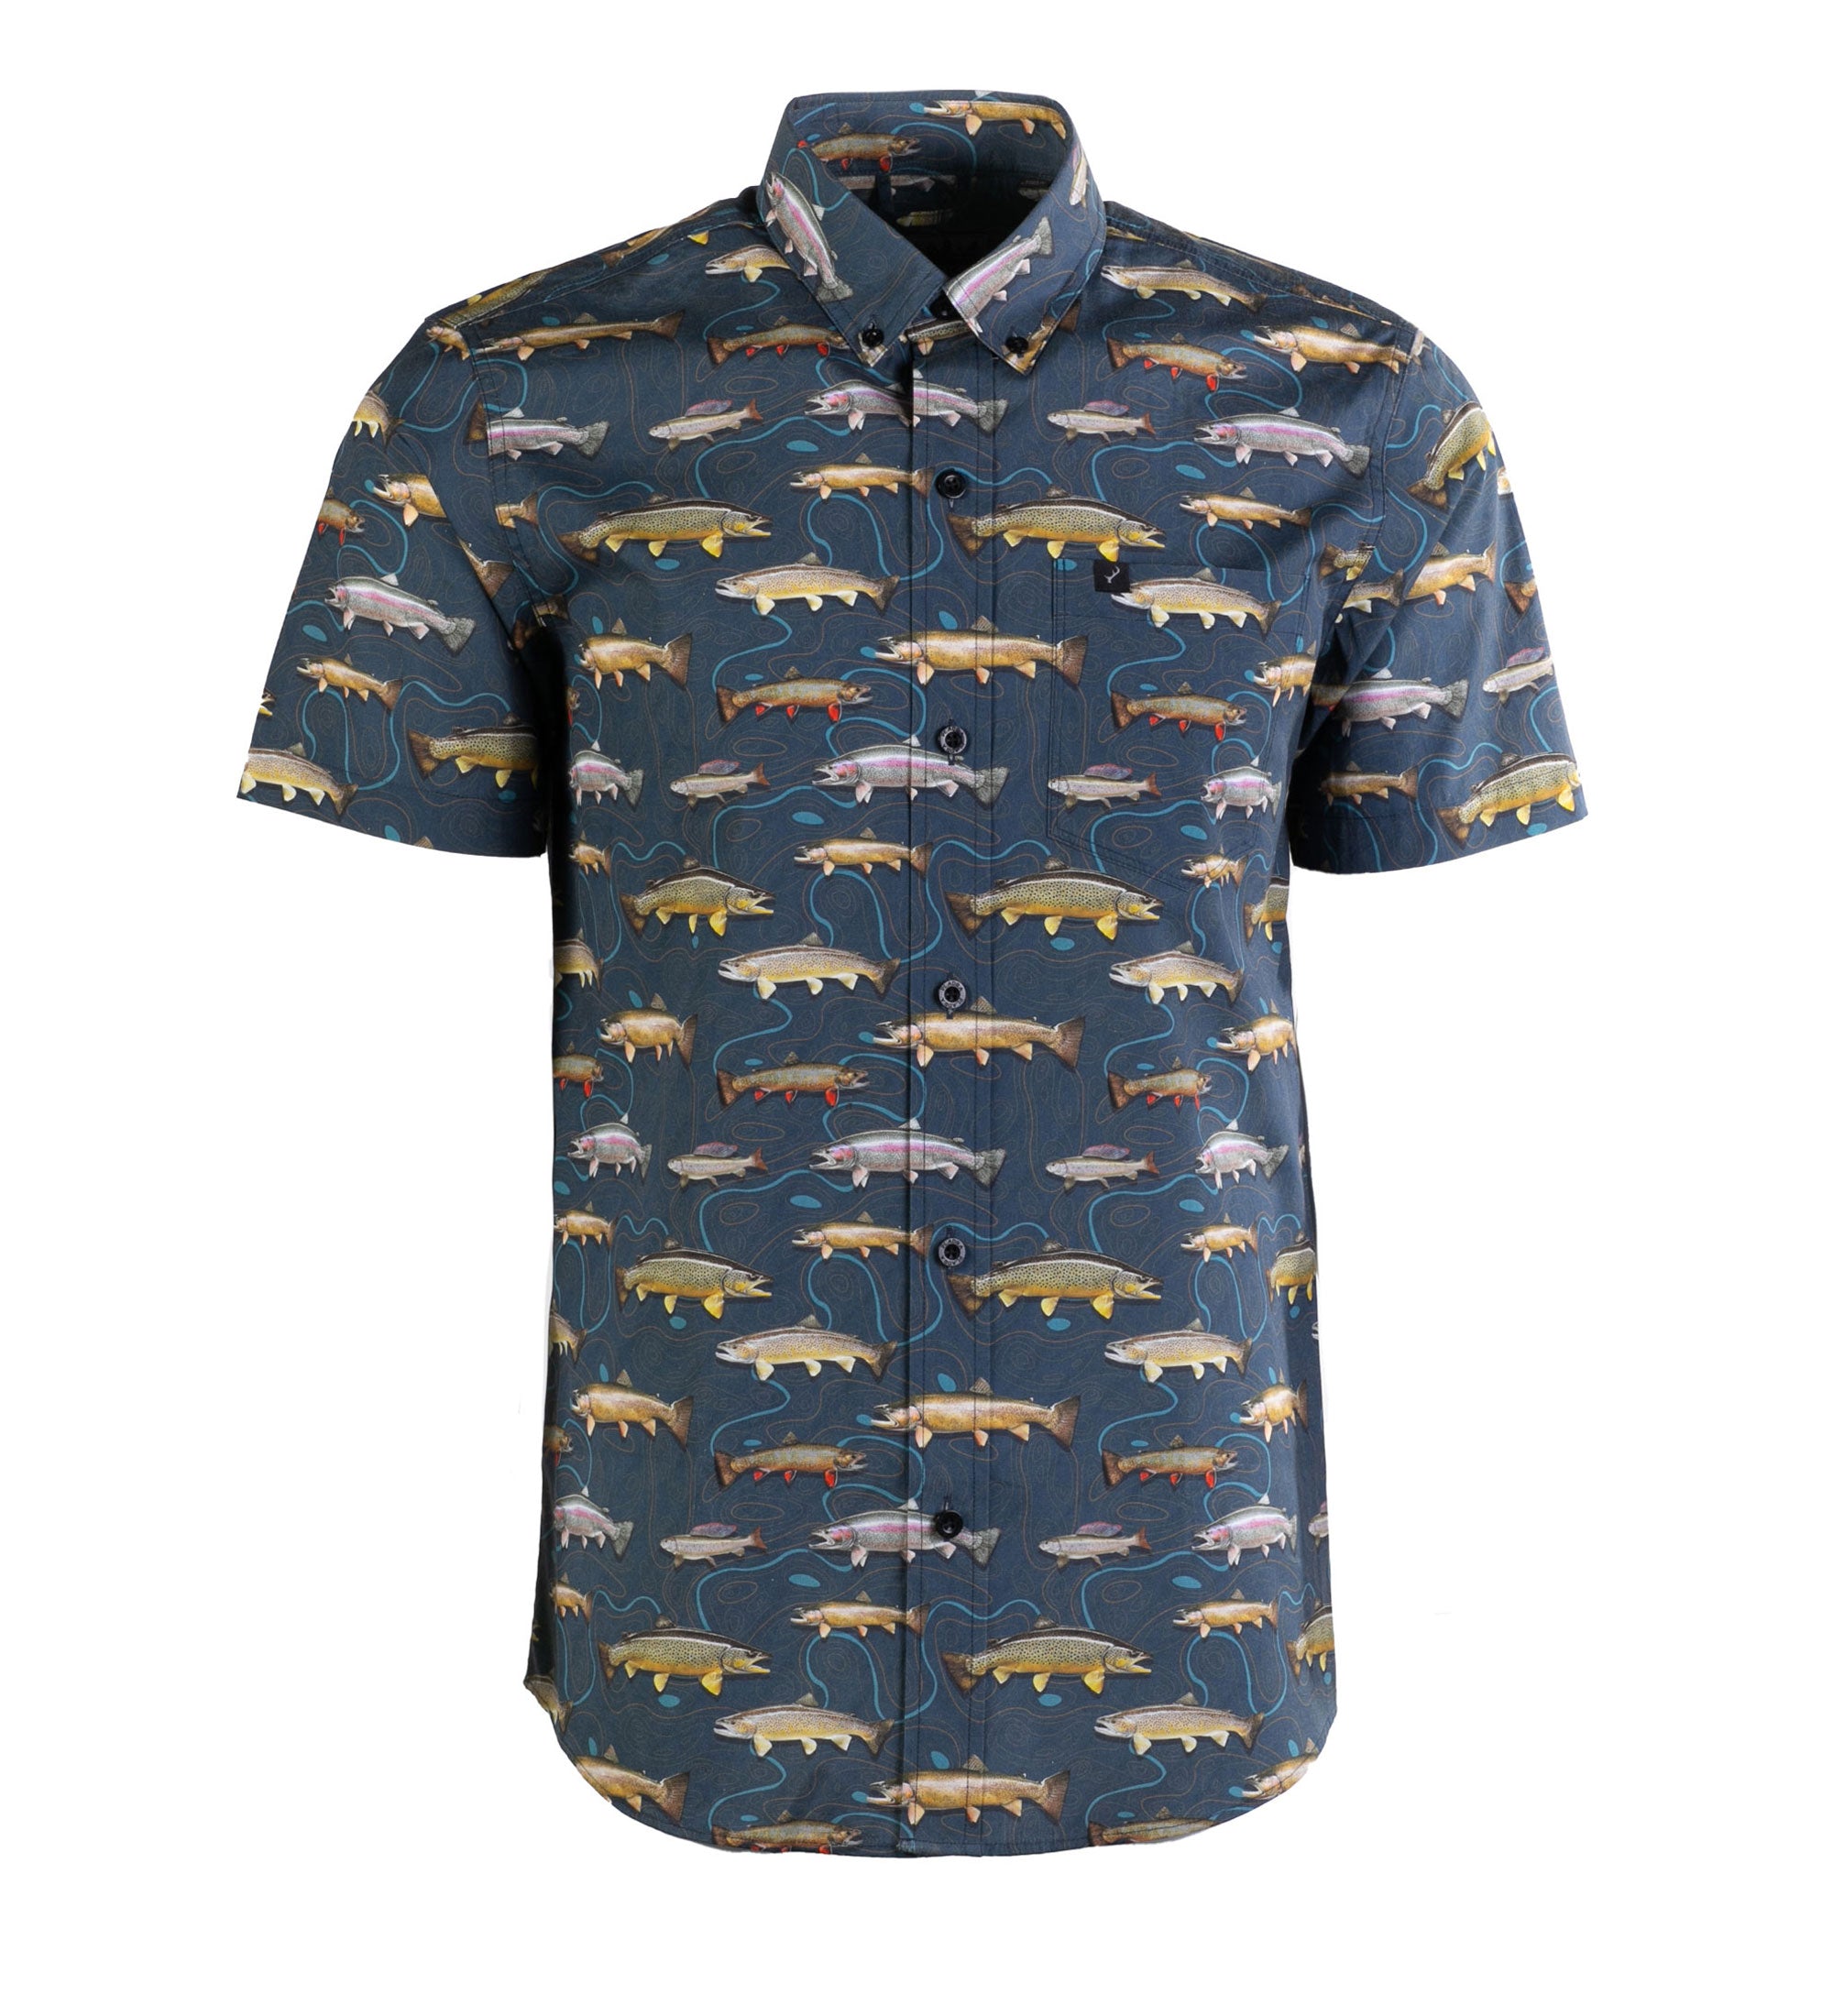 Men's S/S Printed Outdoor Aloha Shirt, Western Trout